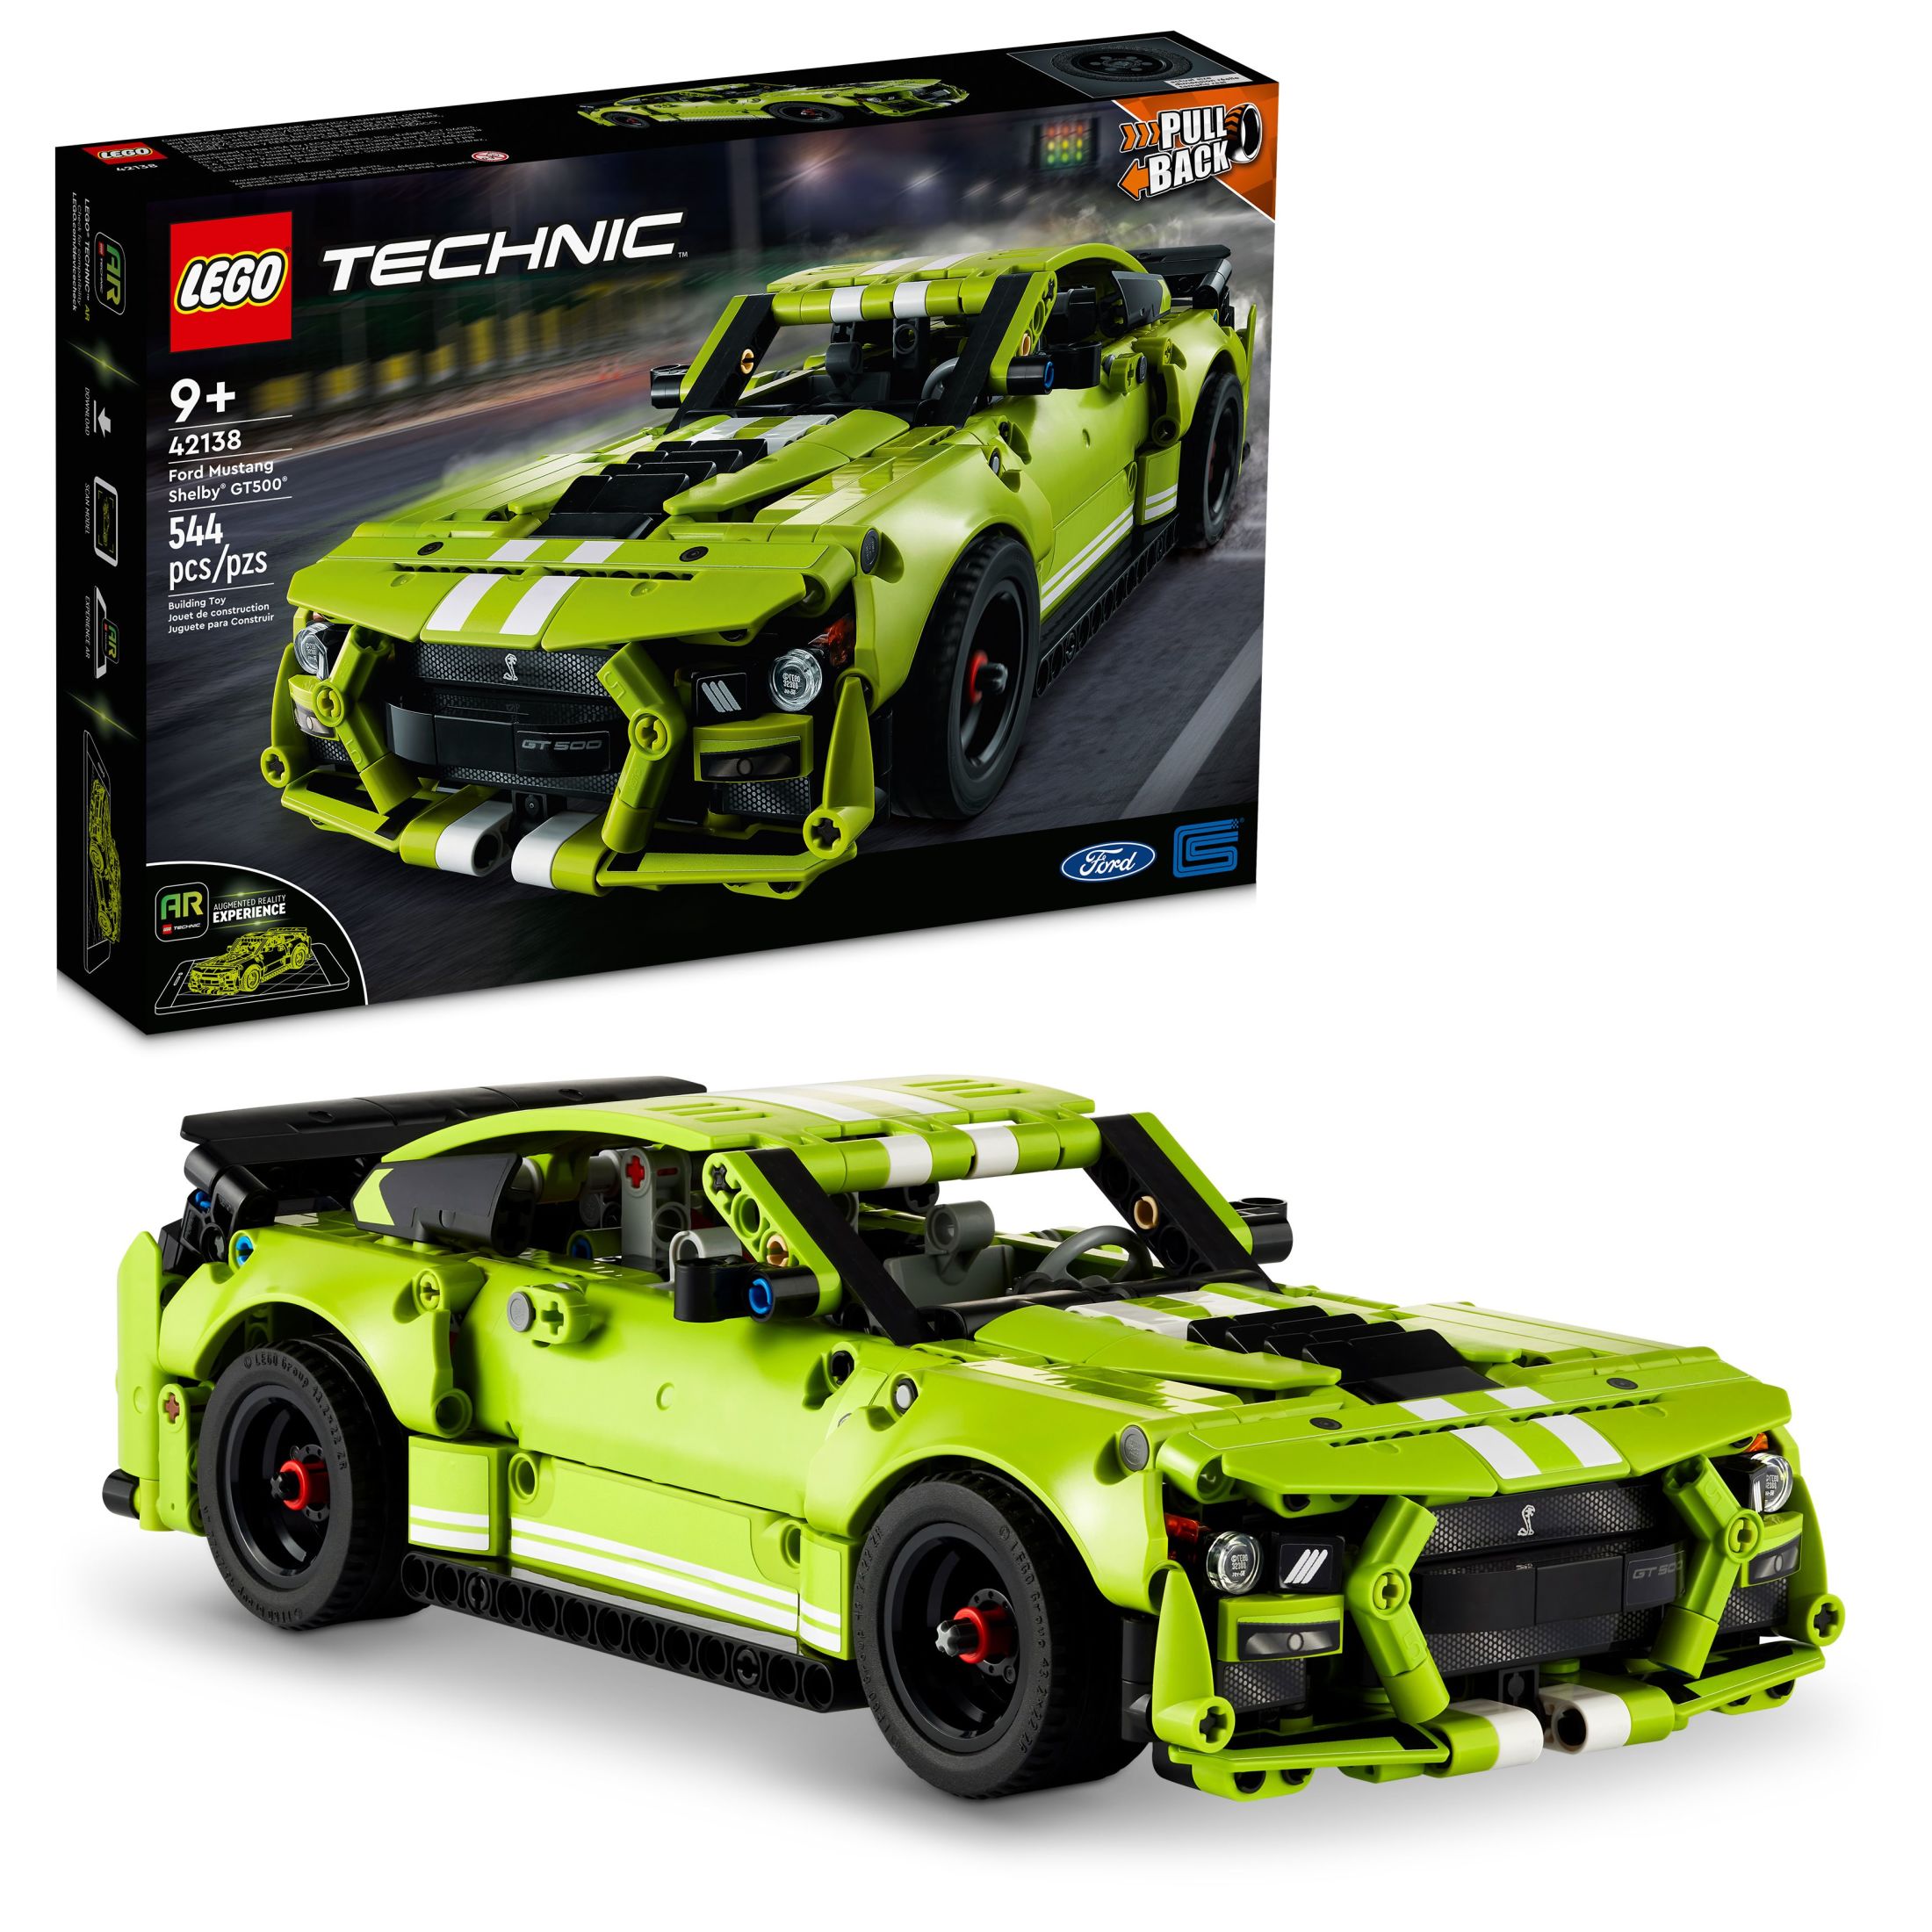 LEGO Technic Ford Mustang Shelby GT500 Building Set 42138 - Pull Back Drag Race Toy Car Model Kit, Featuring AR App for Fast Action Play, Great Gift for Boys, Girls, and Teens Ages 9+ - image 1 of 9